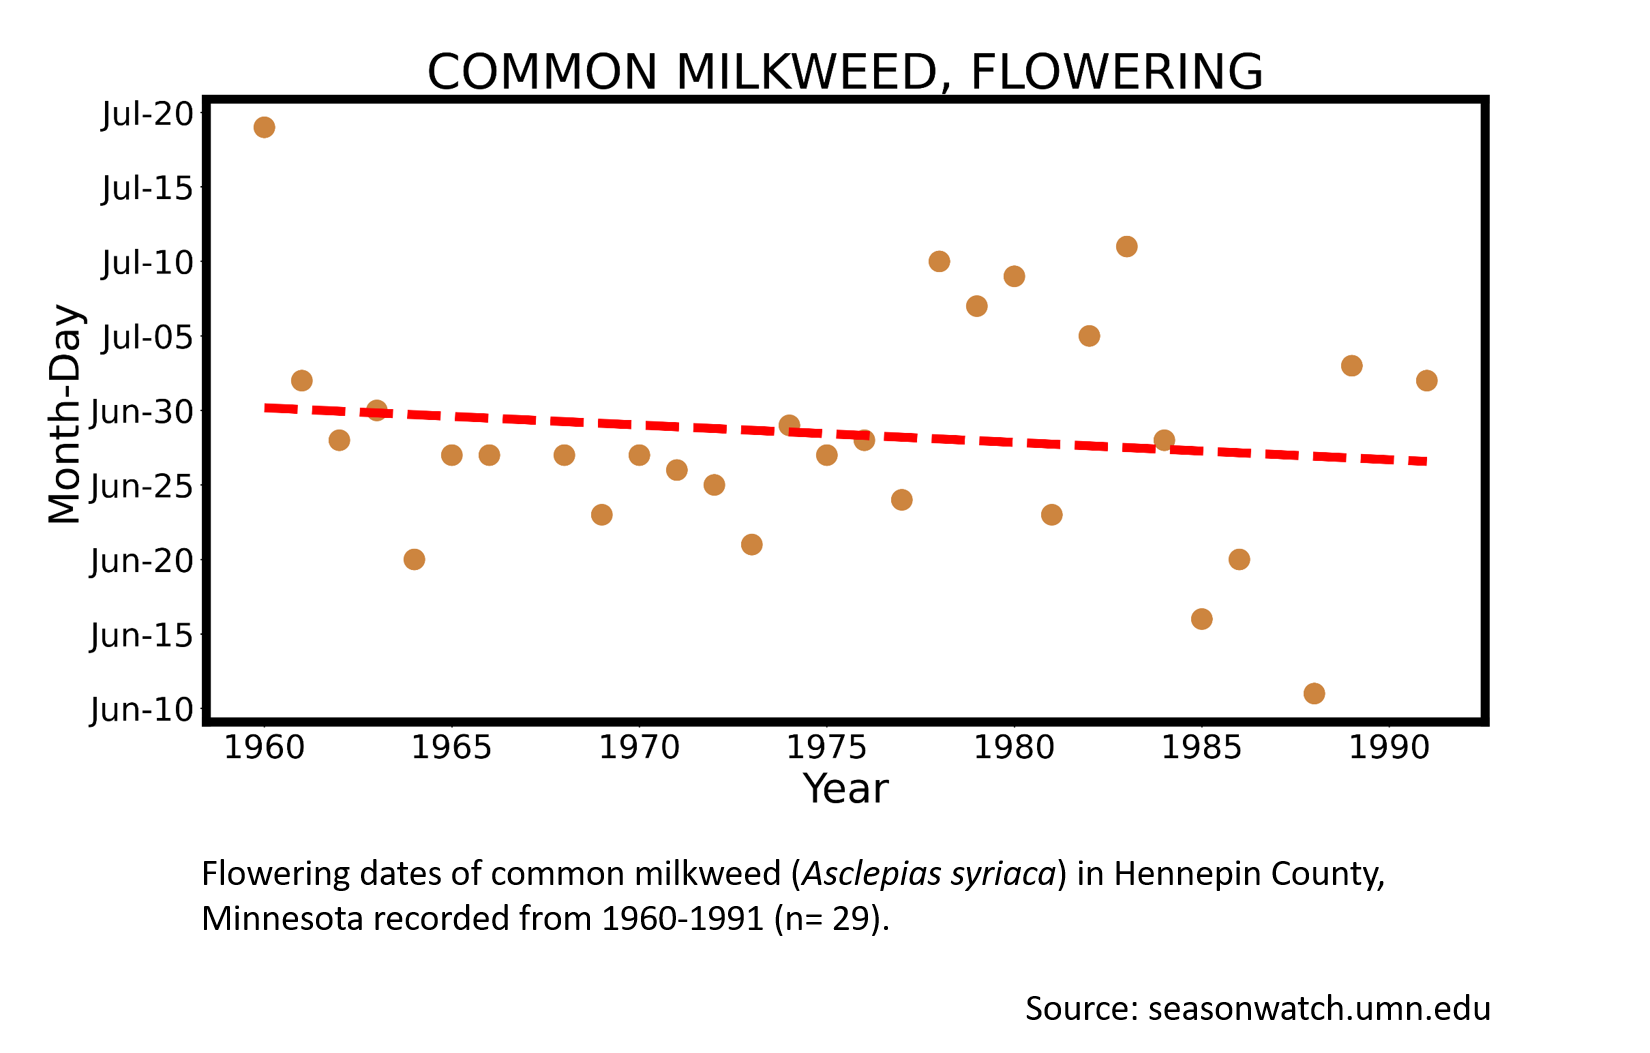 Scatterplot showing common milkweed phenology in Hennepin County, Minnesota